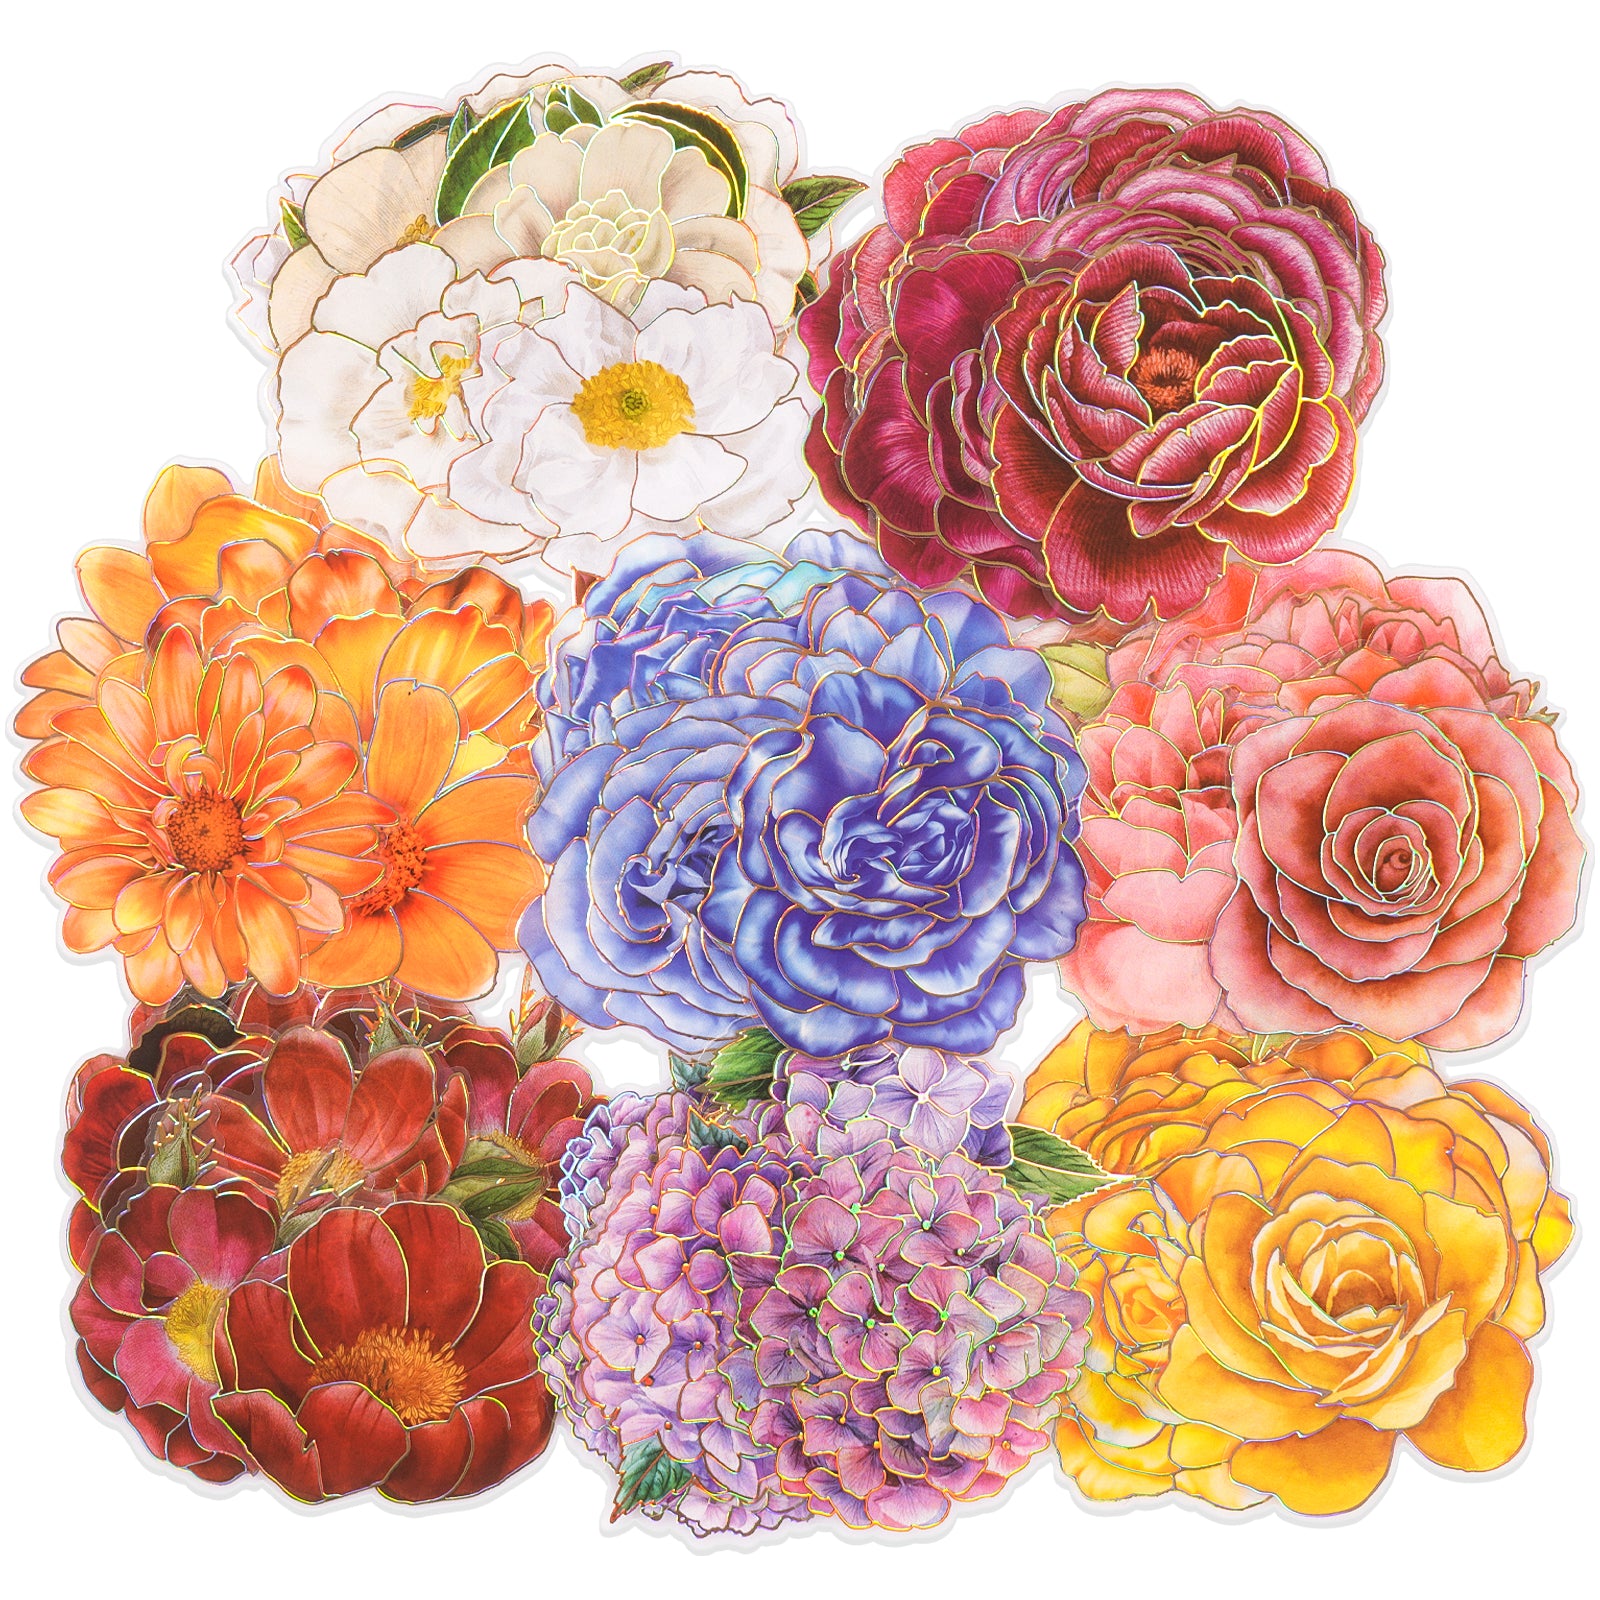 80 Pieces Natural Flower Stickers for Scrapbooking, Self-Adhesive